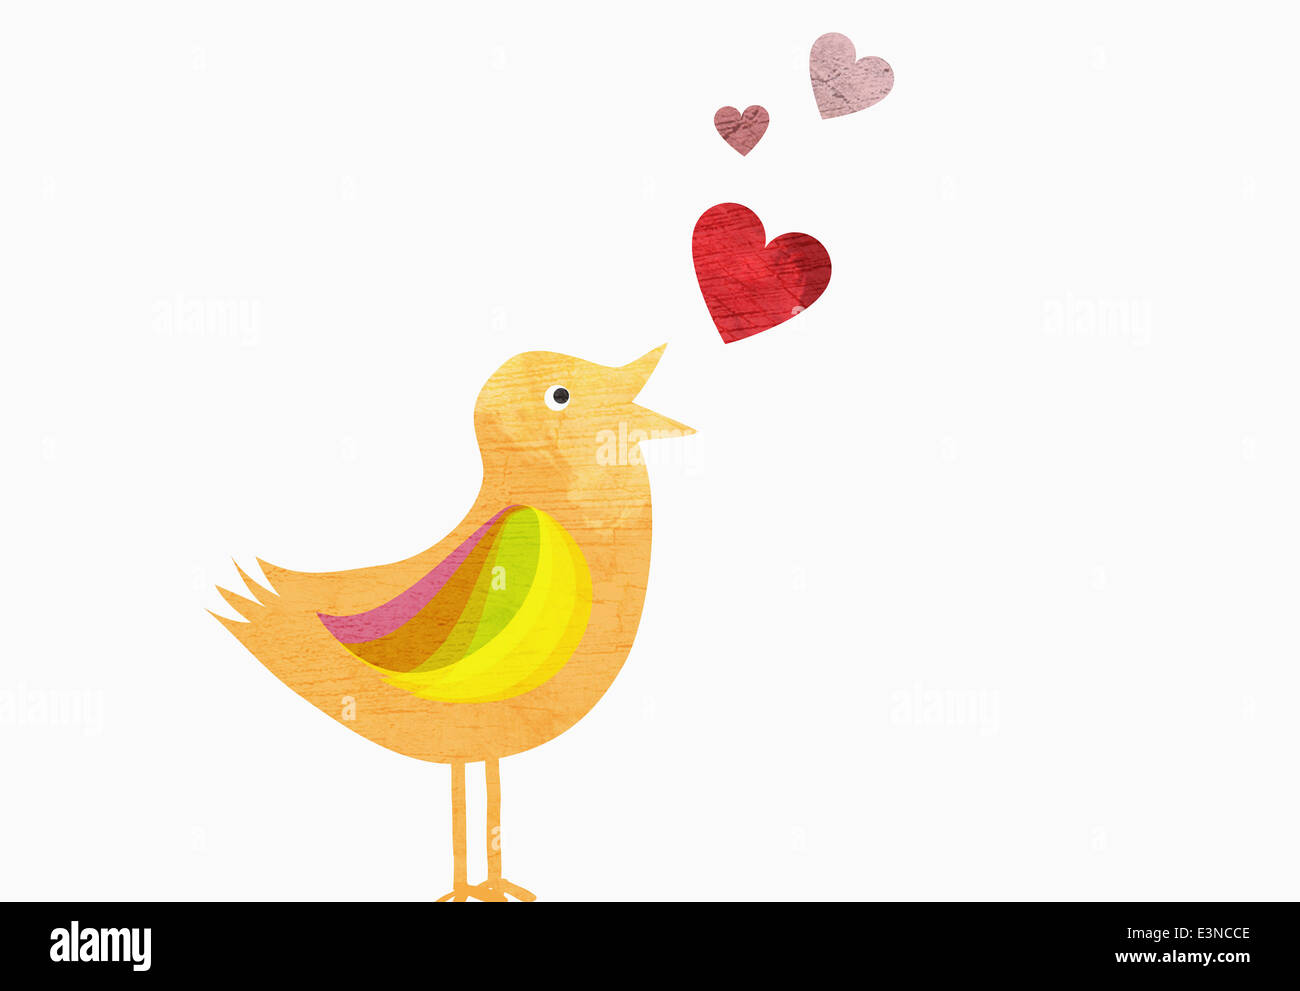 Songbird with heart shapes representing love against white background Stock Photo